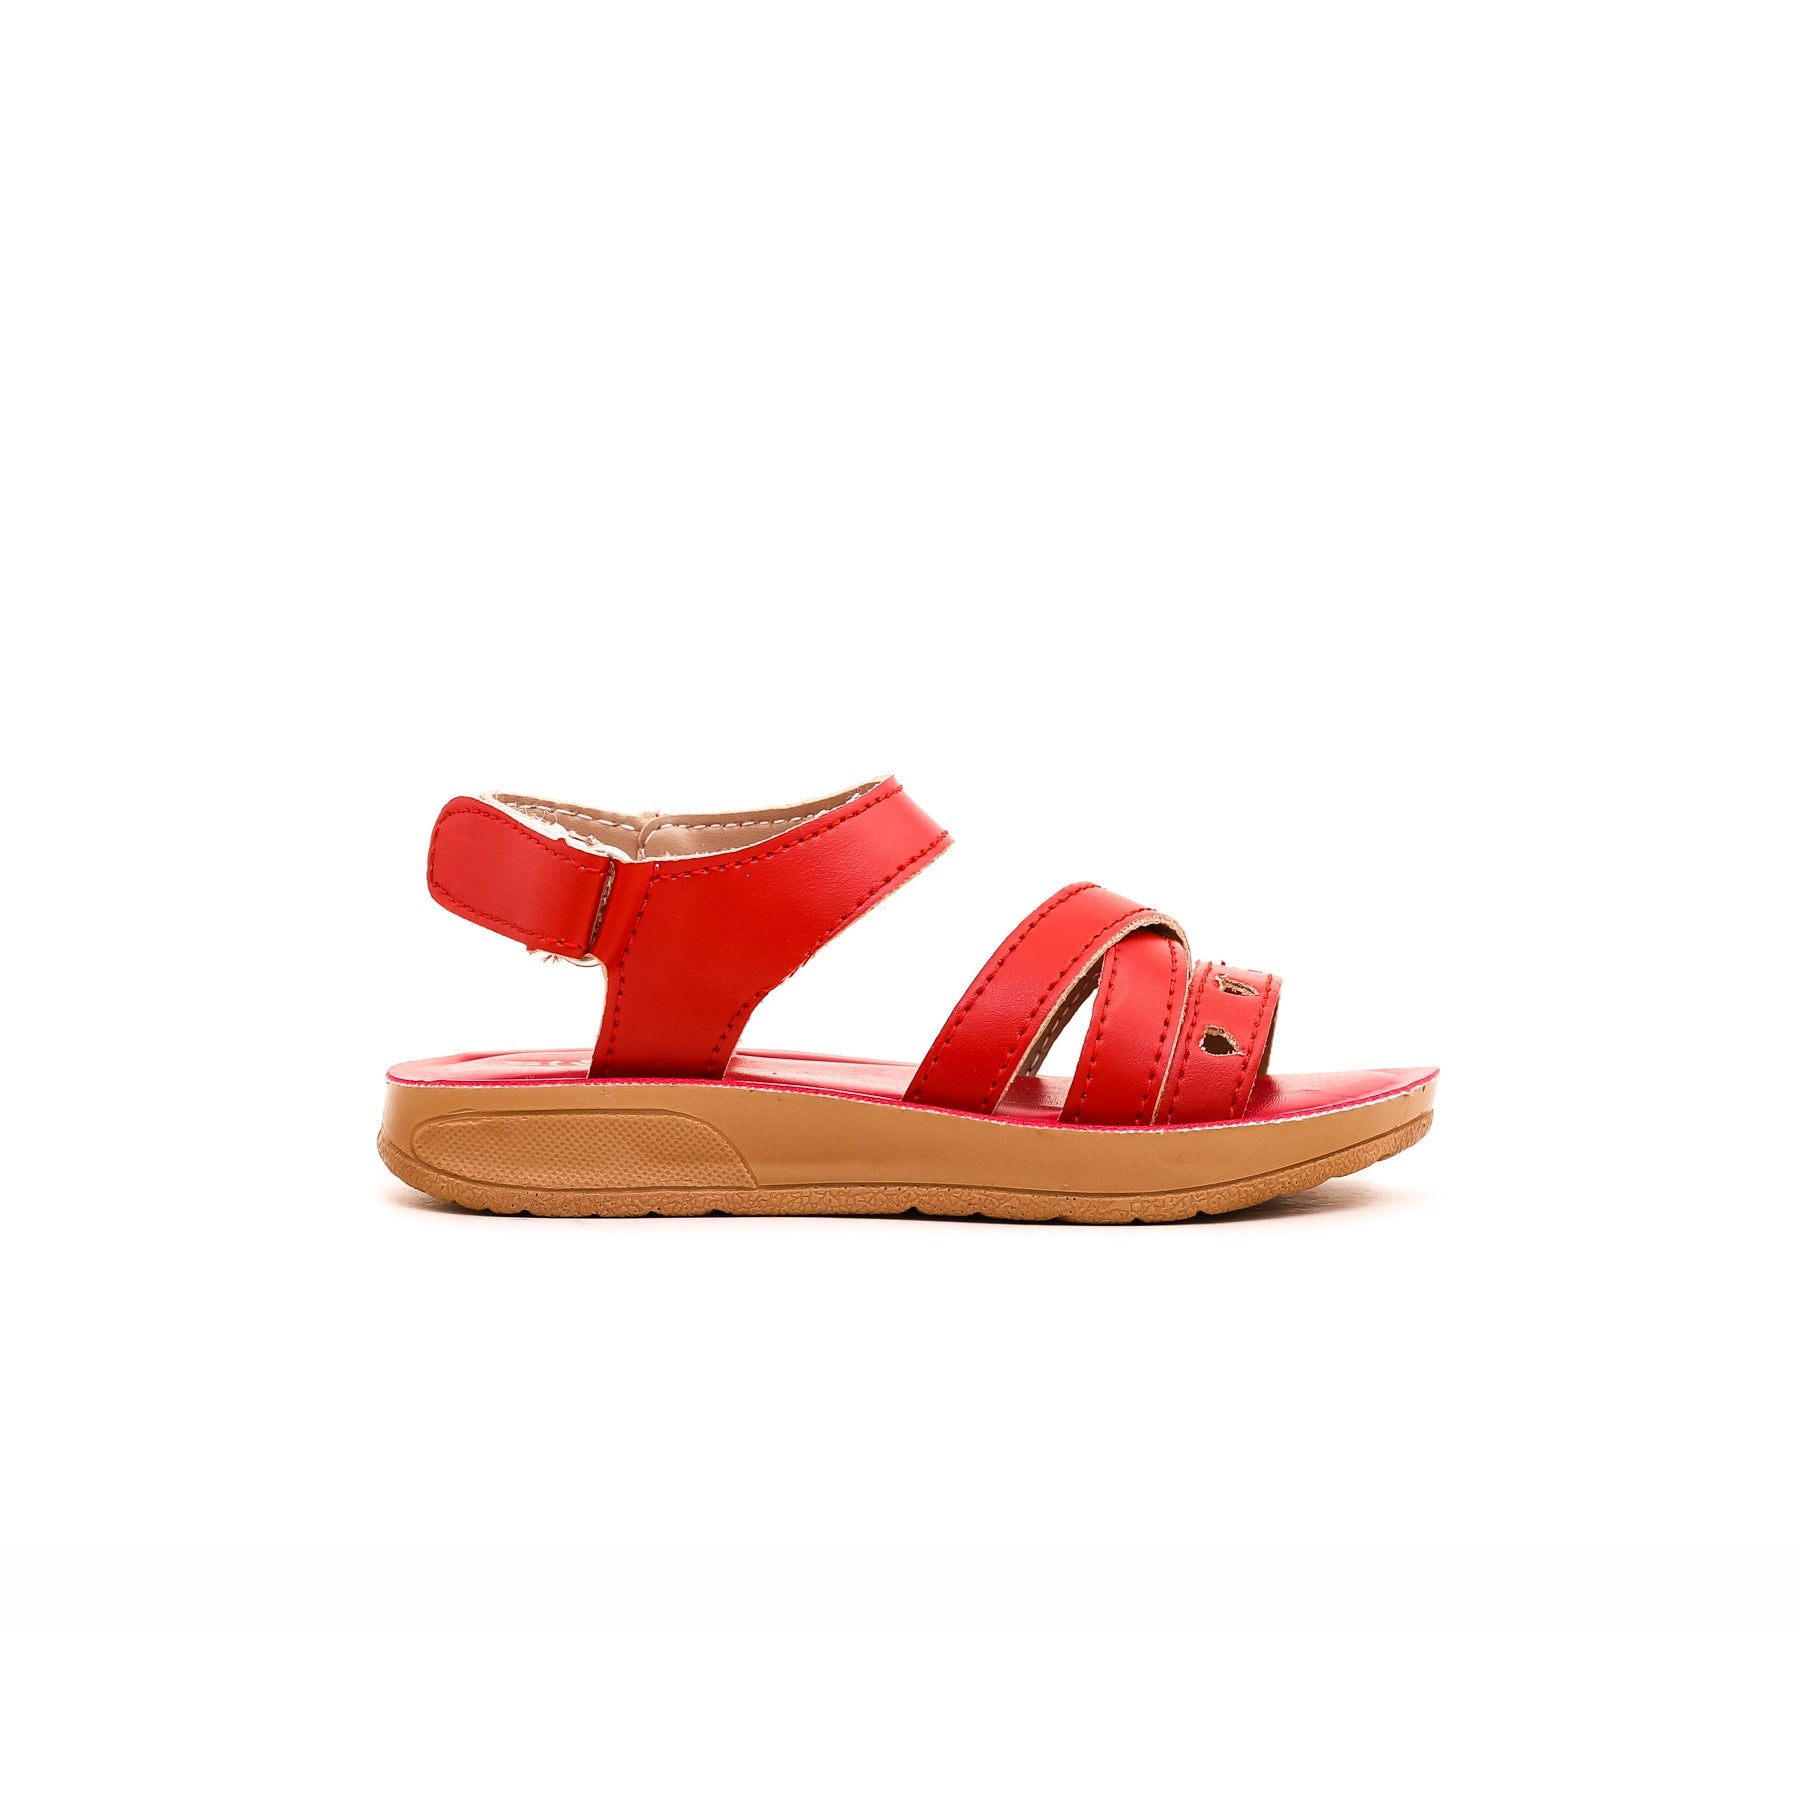 Girls Red Casual Sandal KD7813